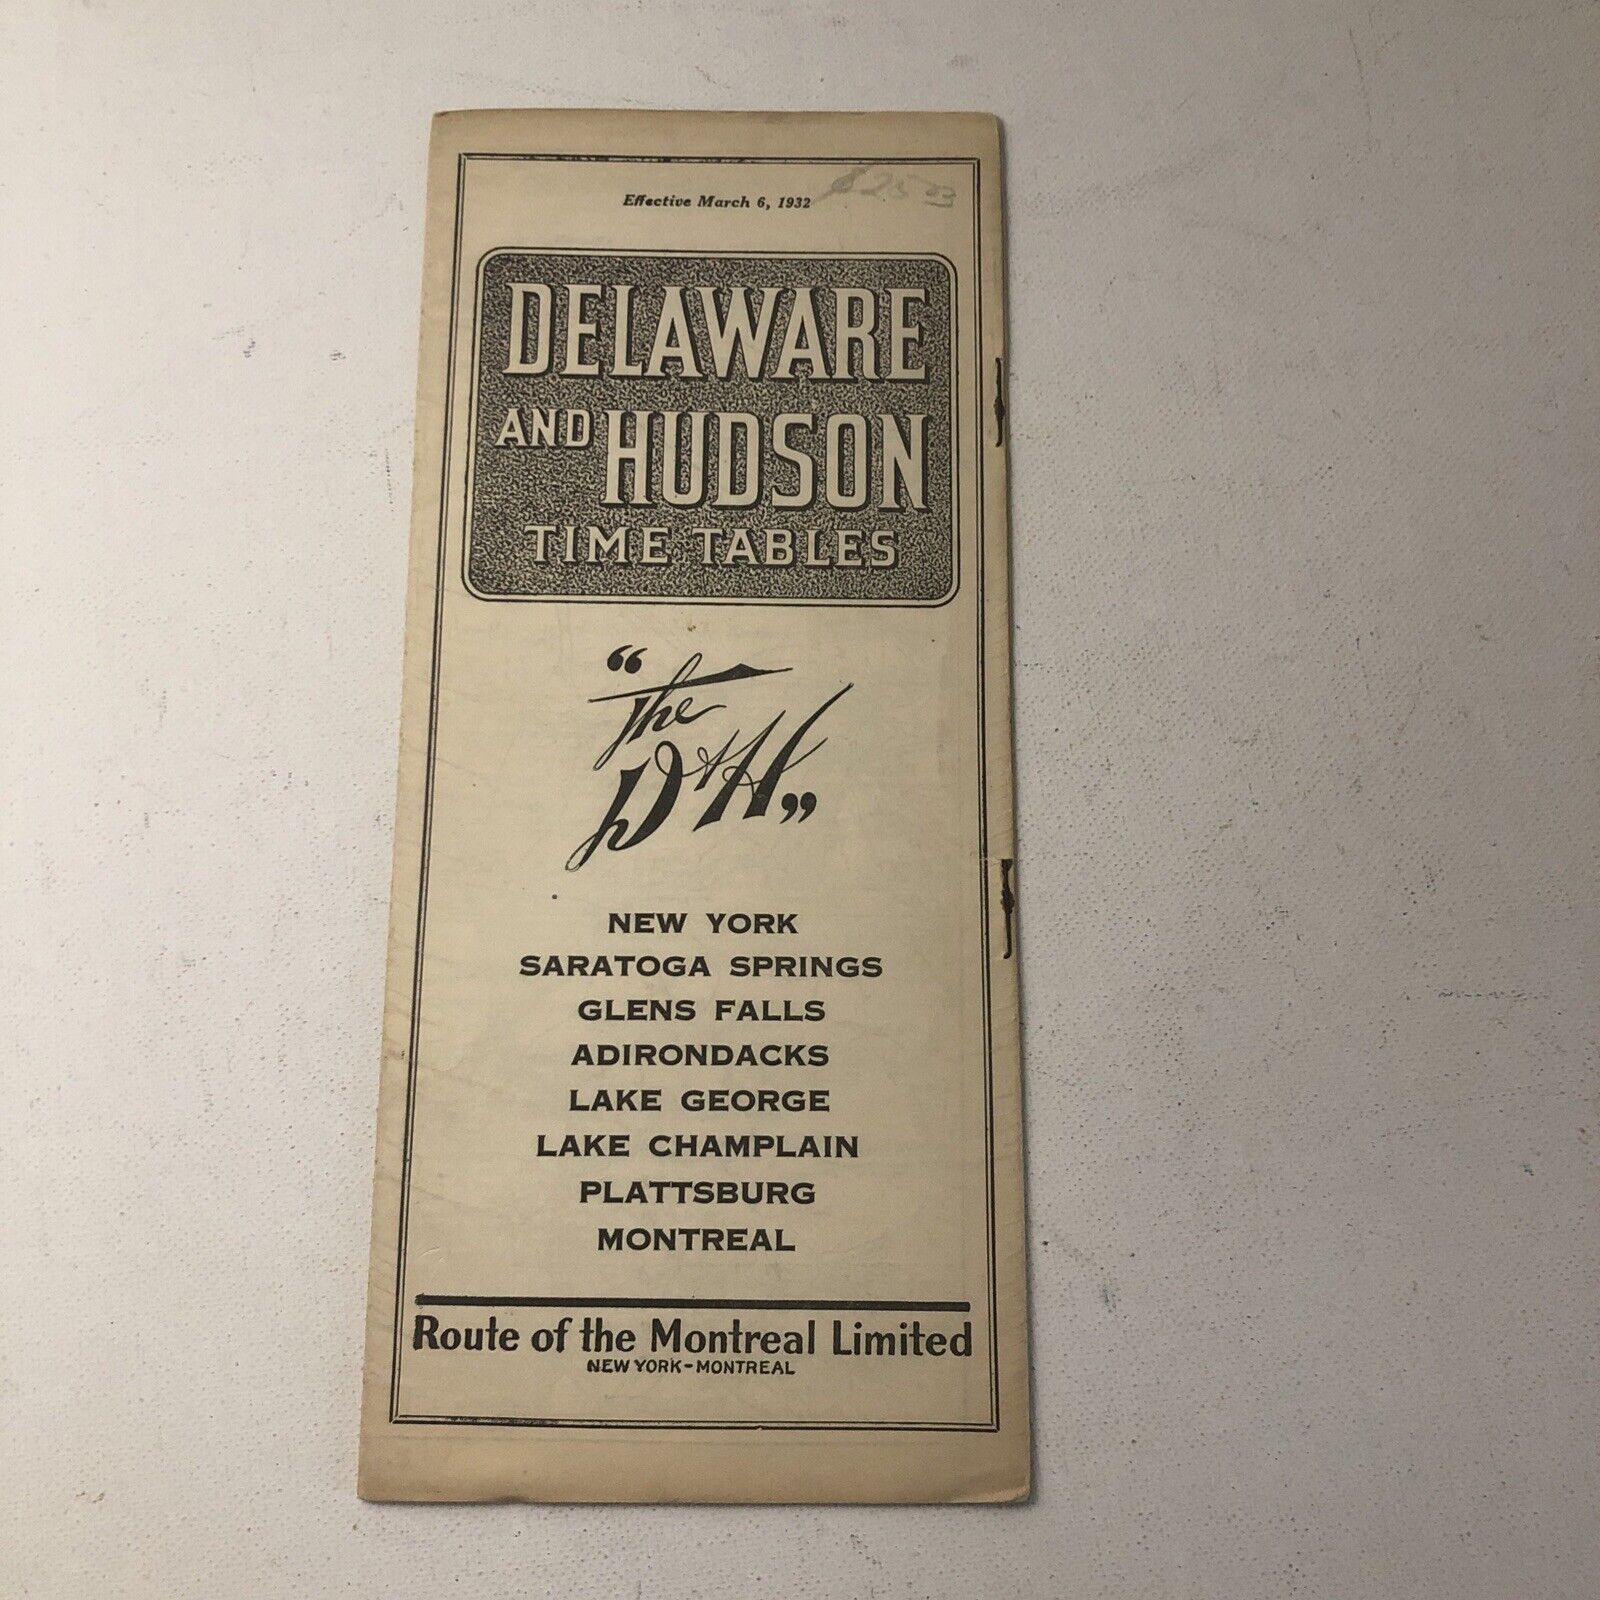 March 6, 1932 D&H DELAWARE AND HUDSON SYSTEM PUBLIC TIMETABLE